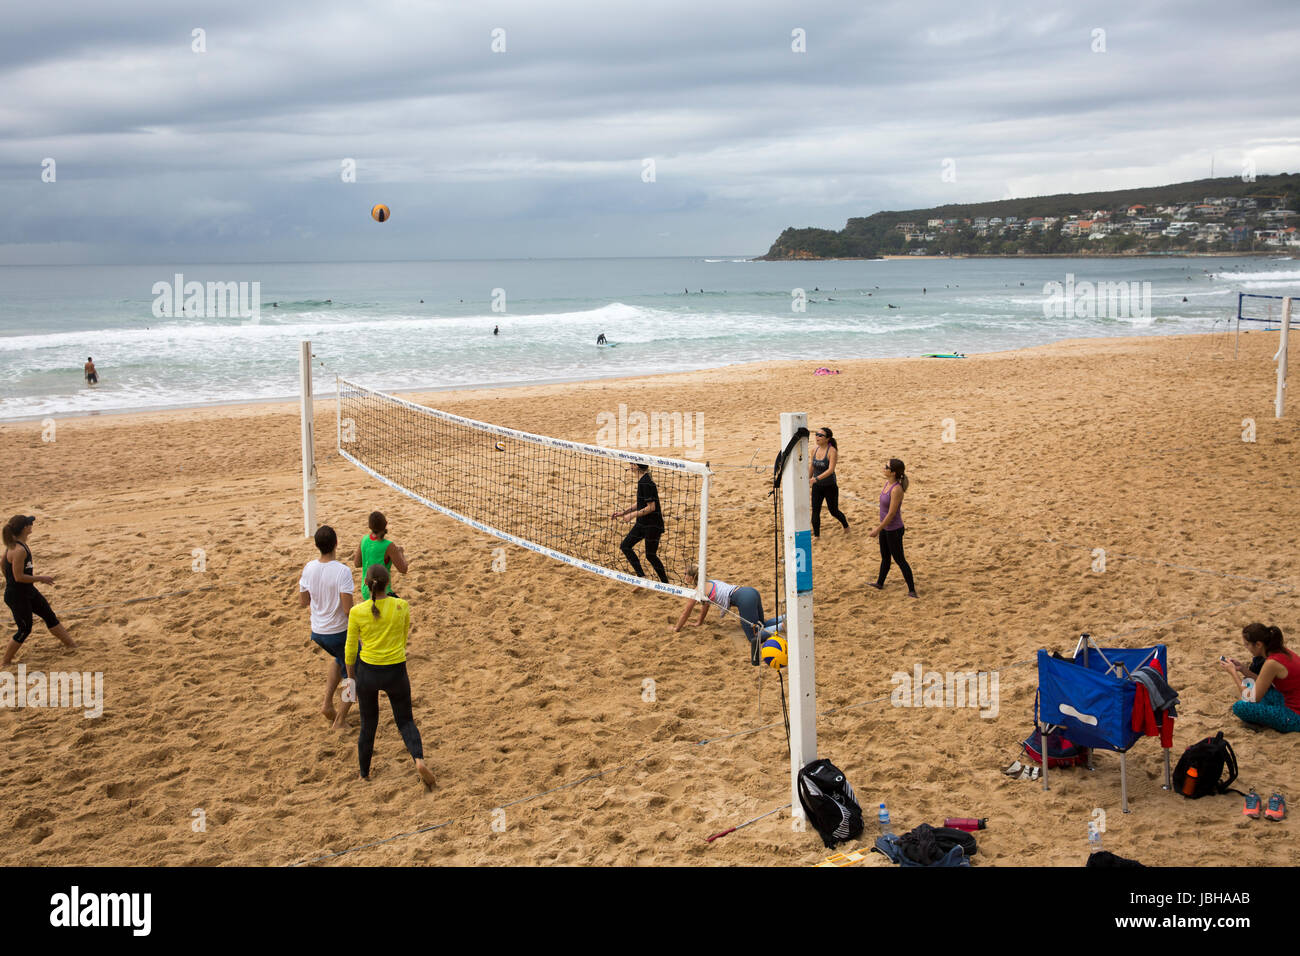 Playing and learning beach volleyball on Manly beach in Sydney,Australia Stock Photo